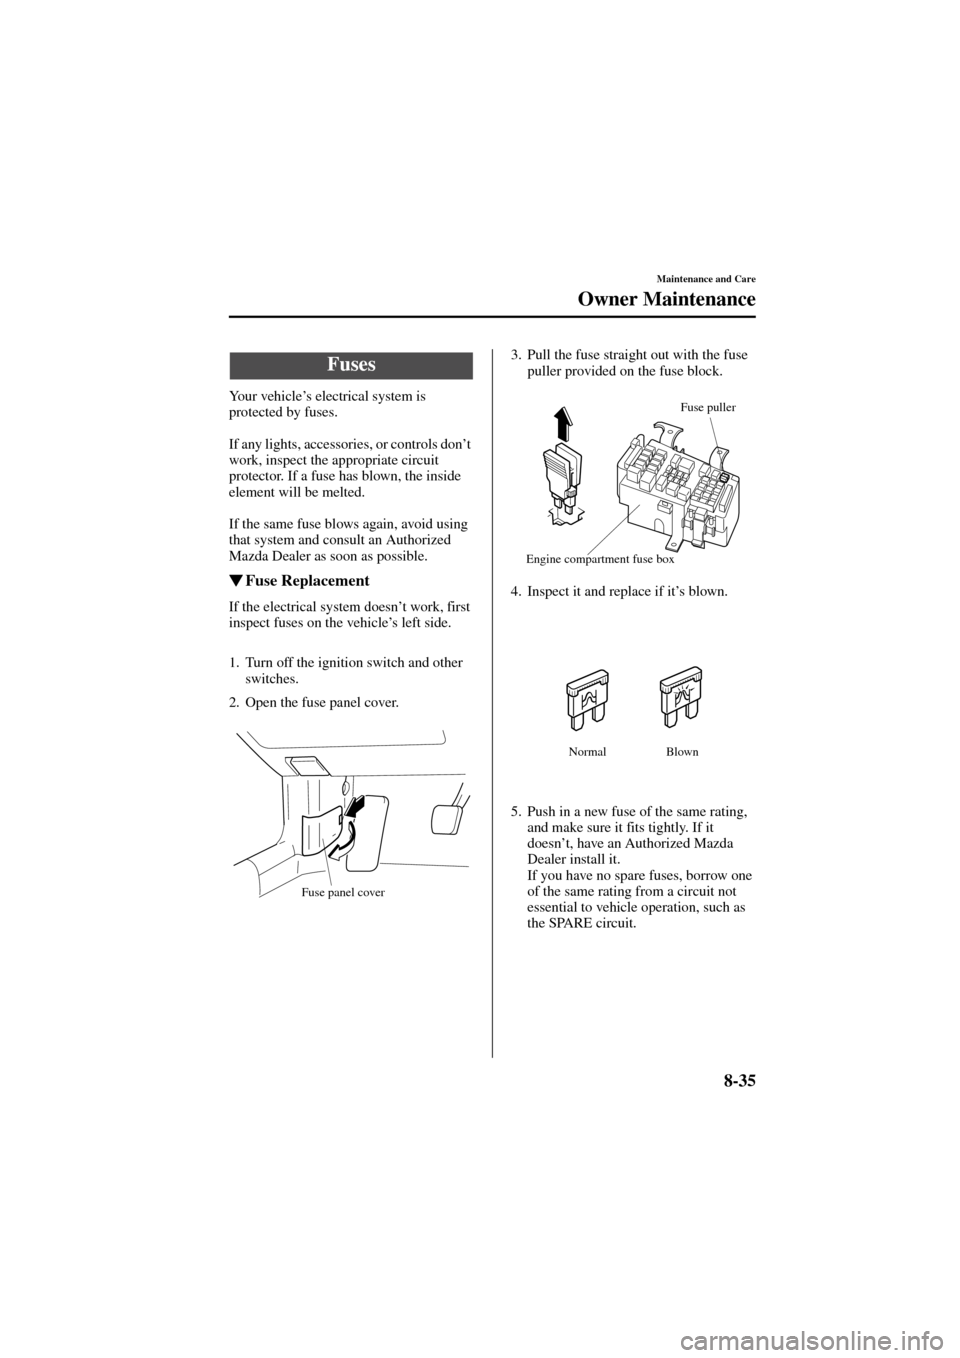 MAZDA MODEL 6 2004  Owners Manual (in English) 8-35
Maintenance and Care
Owner Maintenance
Form No. 8R29-EA-02I
Your vehicle’s electrical system is 
protected by fuses.
If any lights, accessories, or controls don’t 
work, inspect the appropria